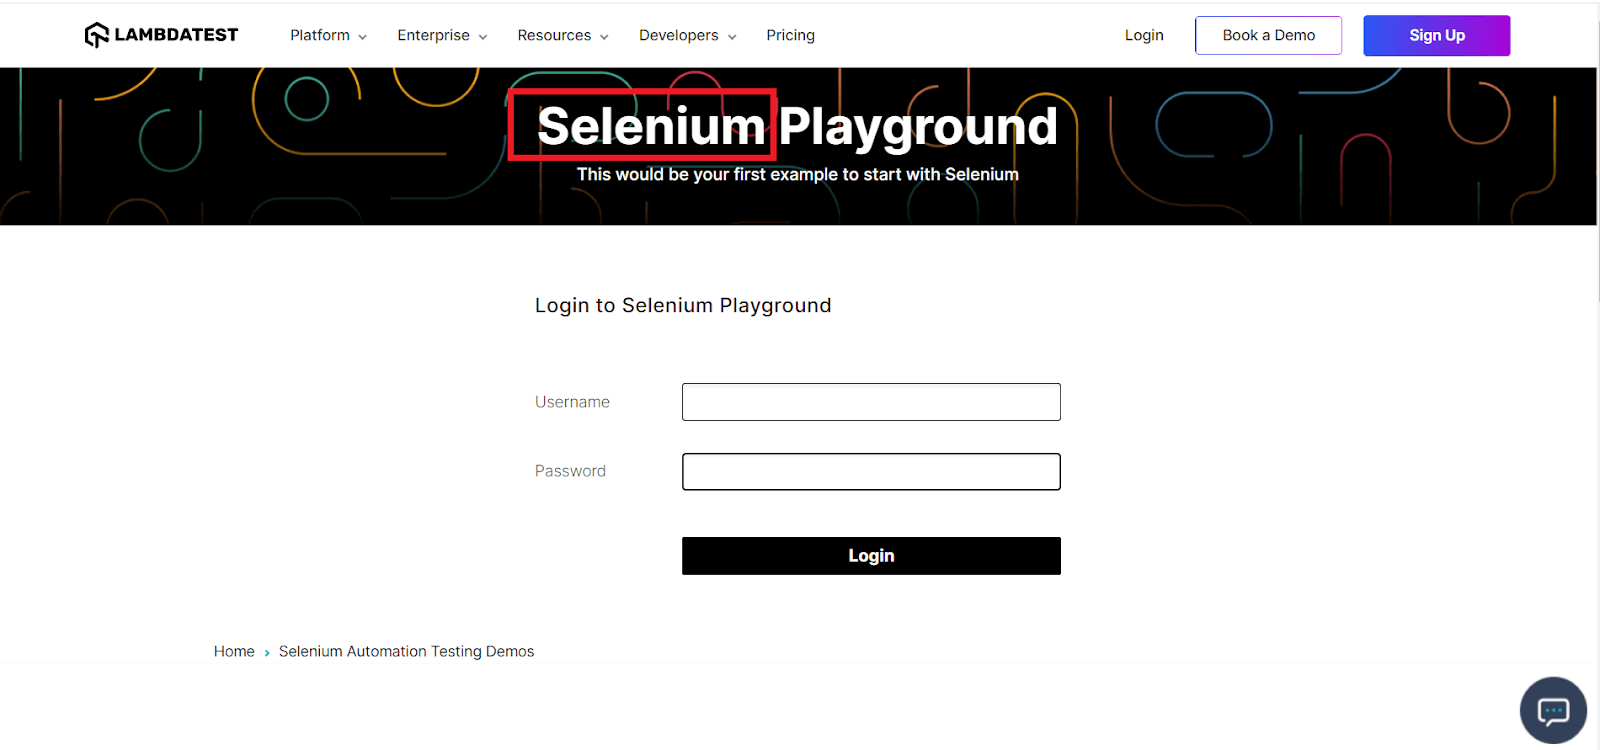  the given text Selenium